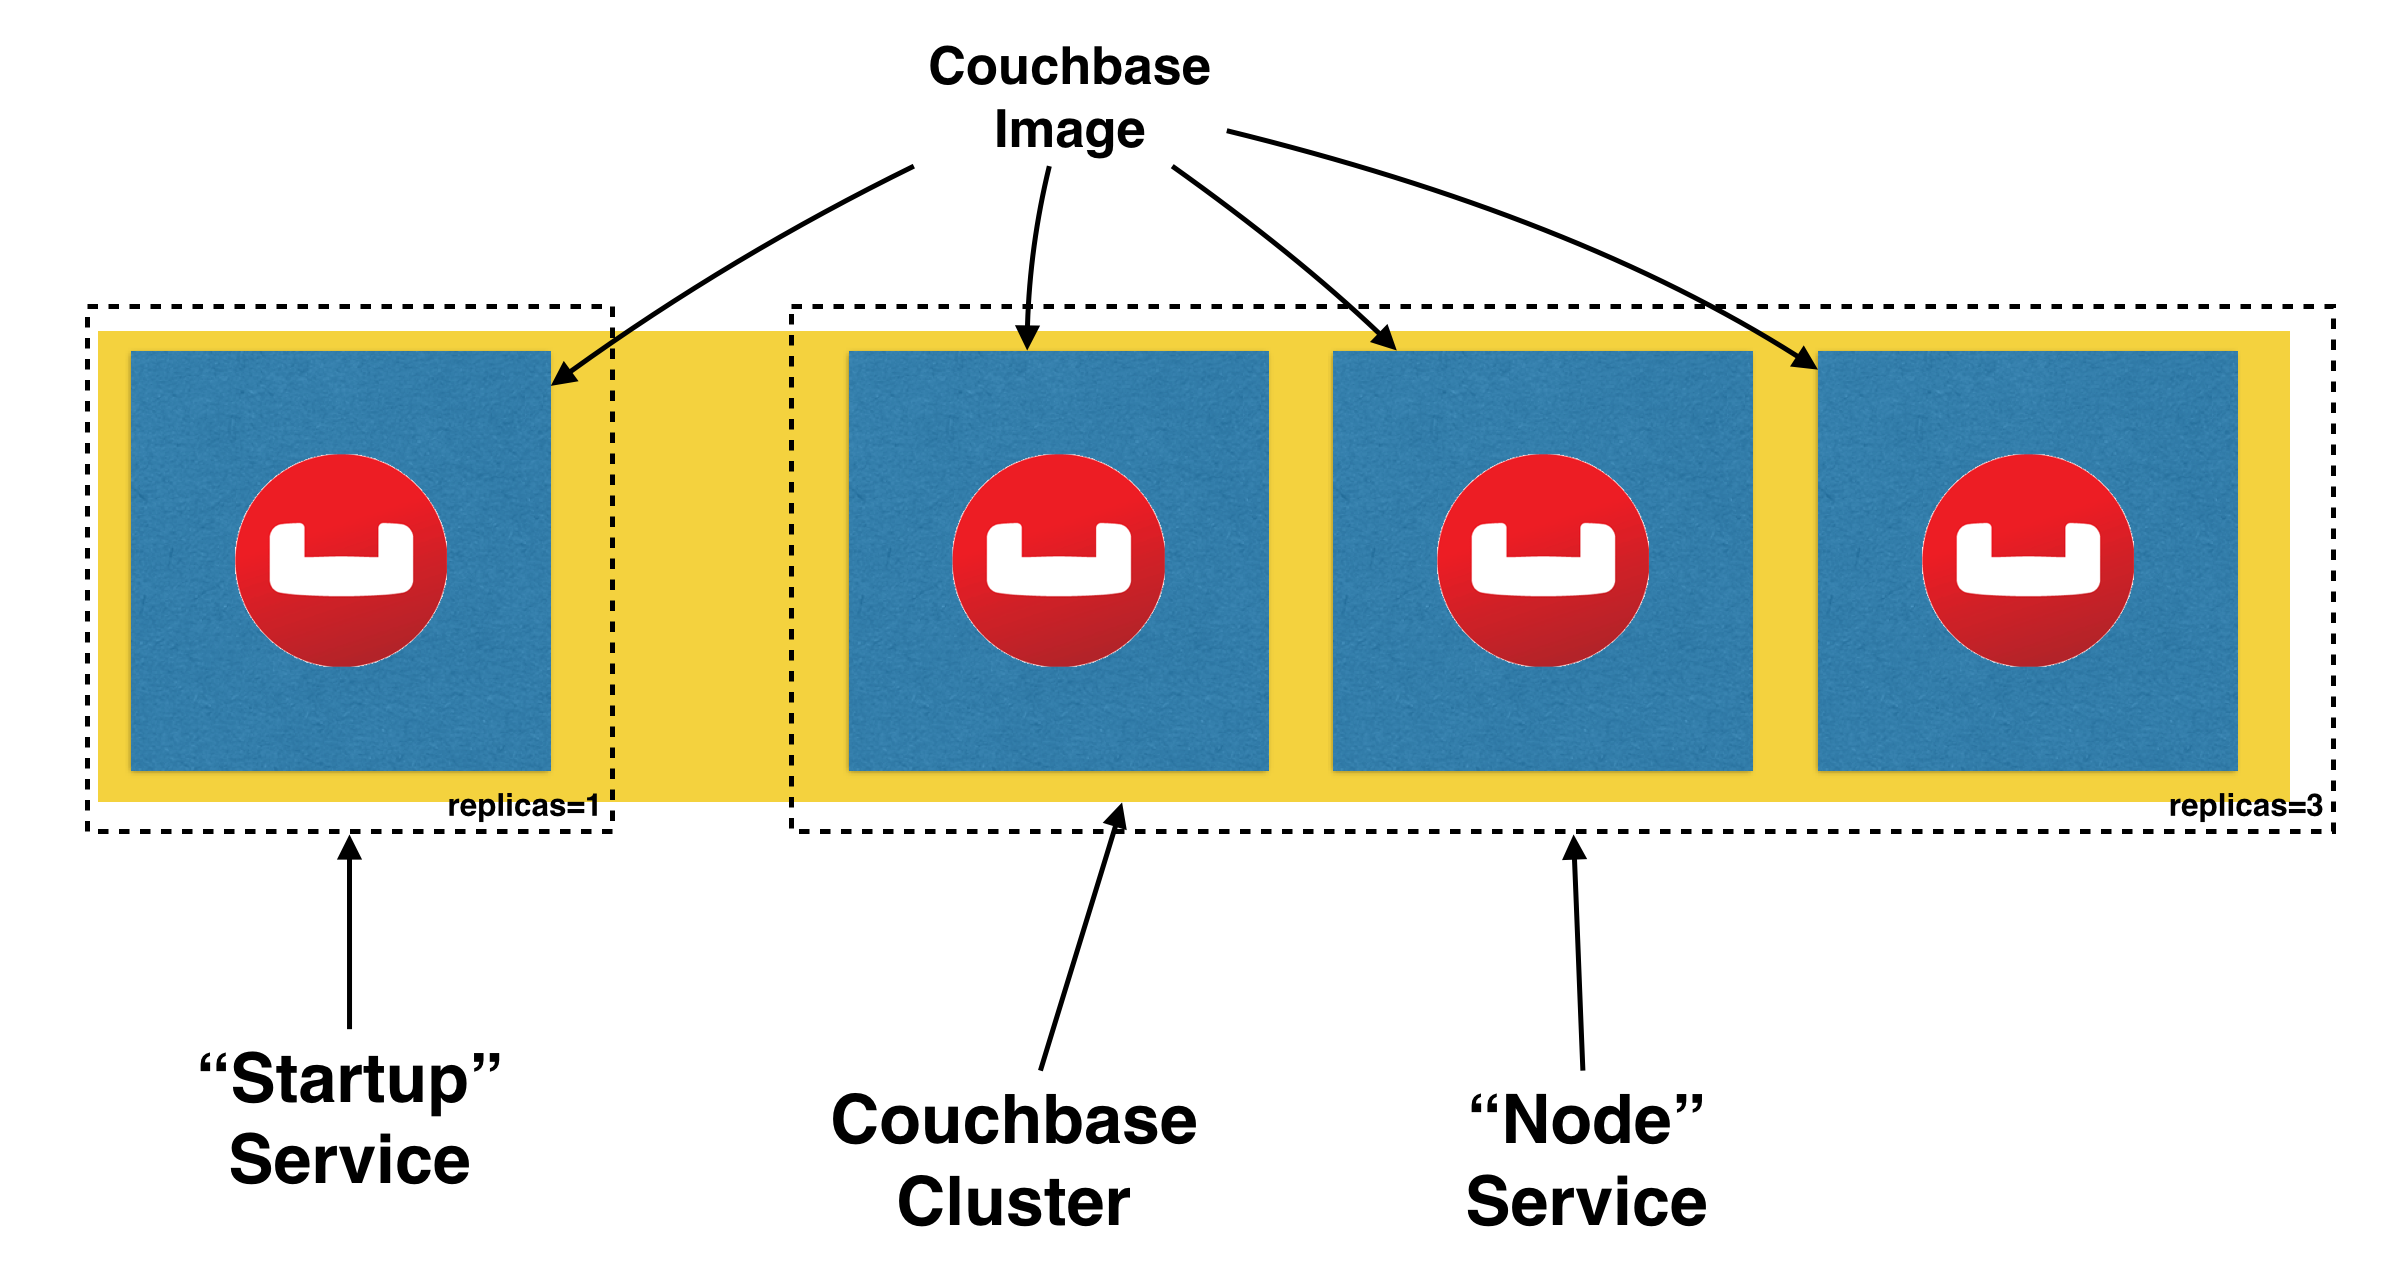 2016-11-18-couchbase-cluster